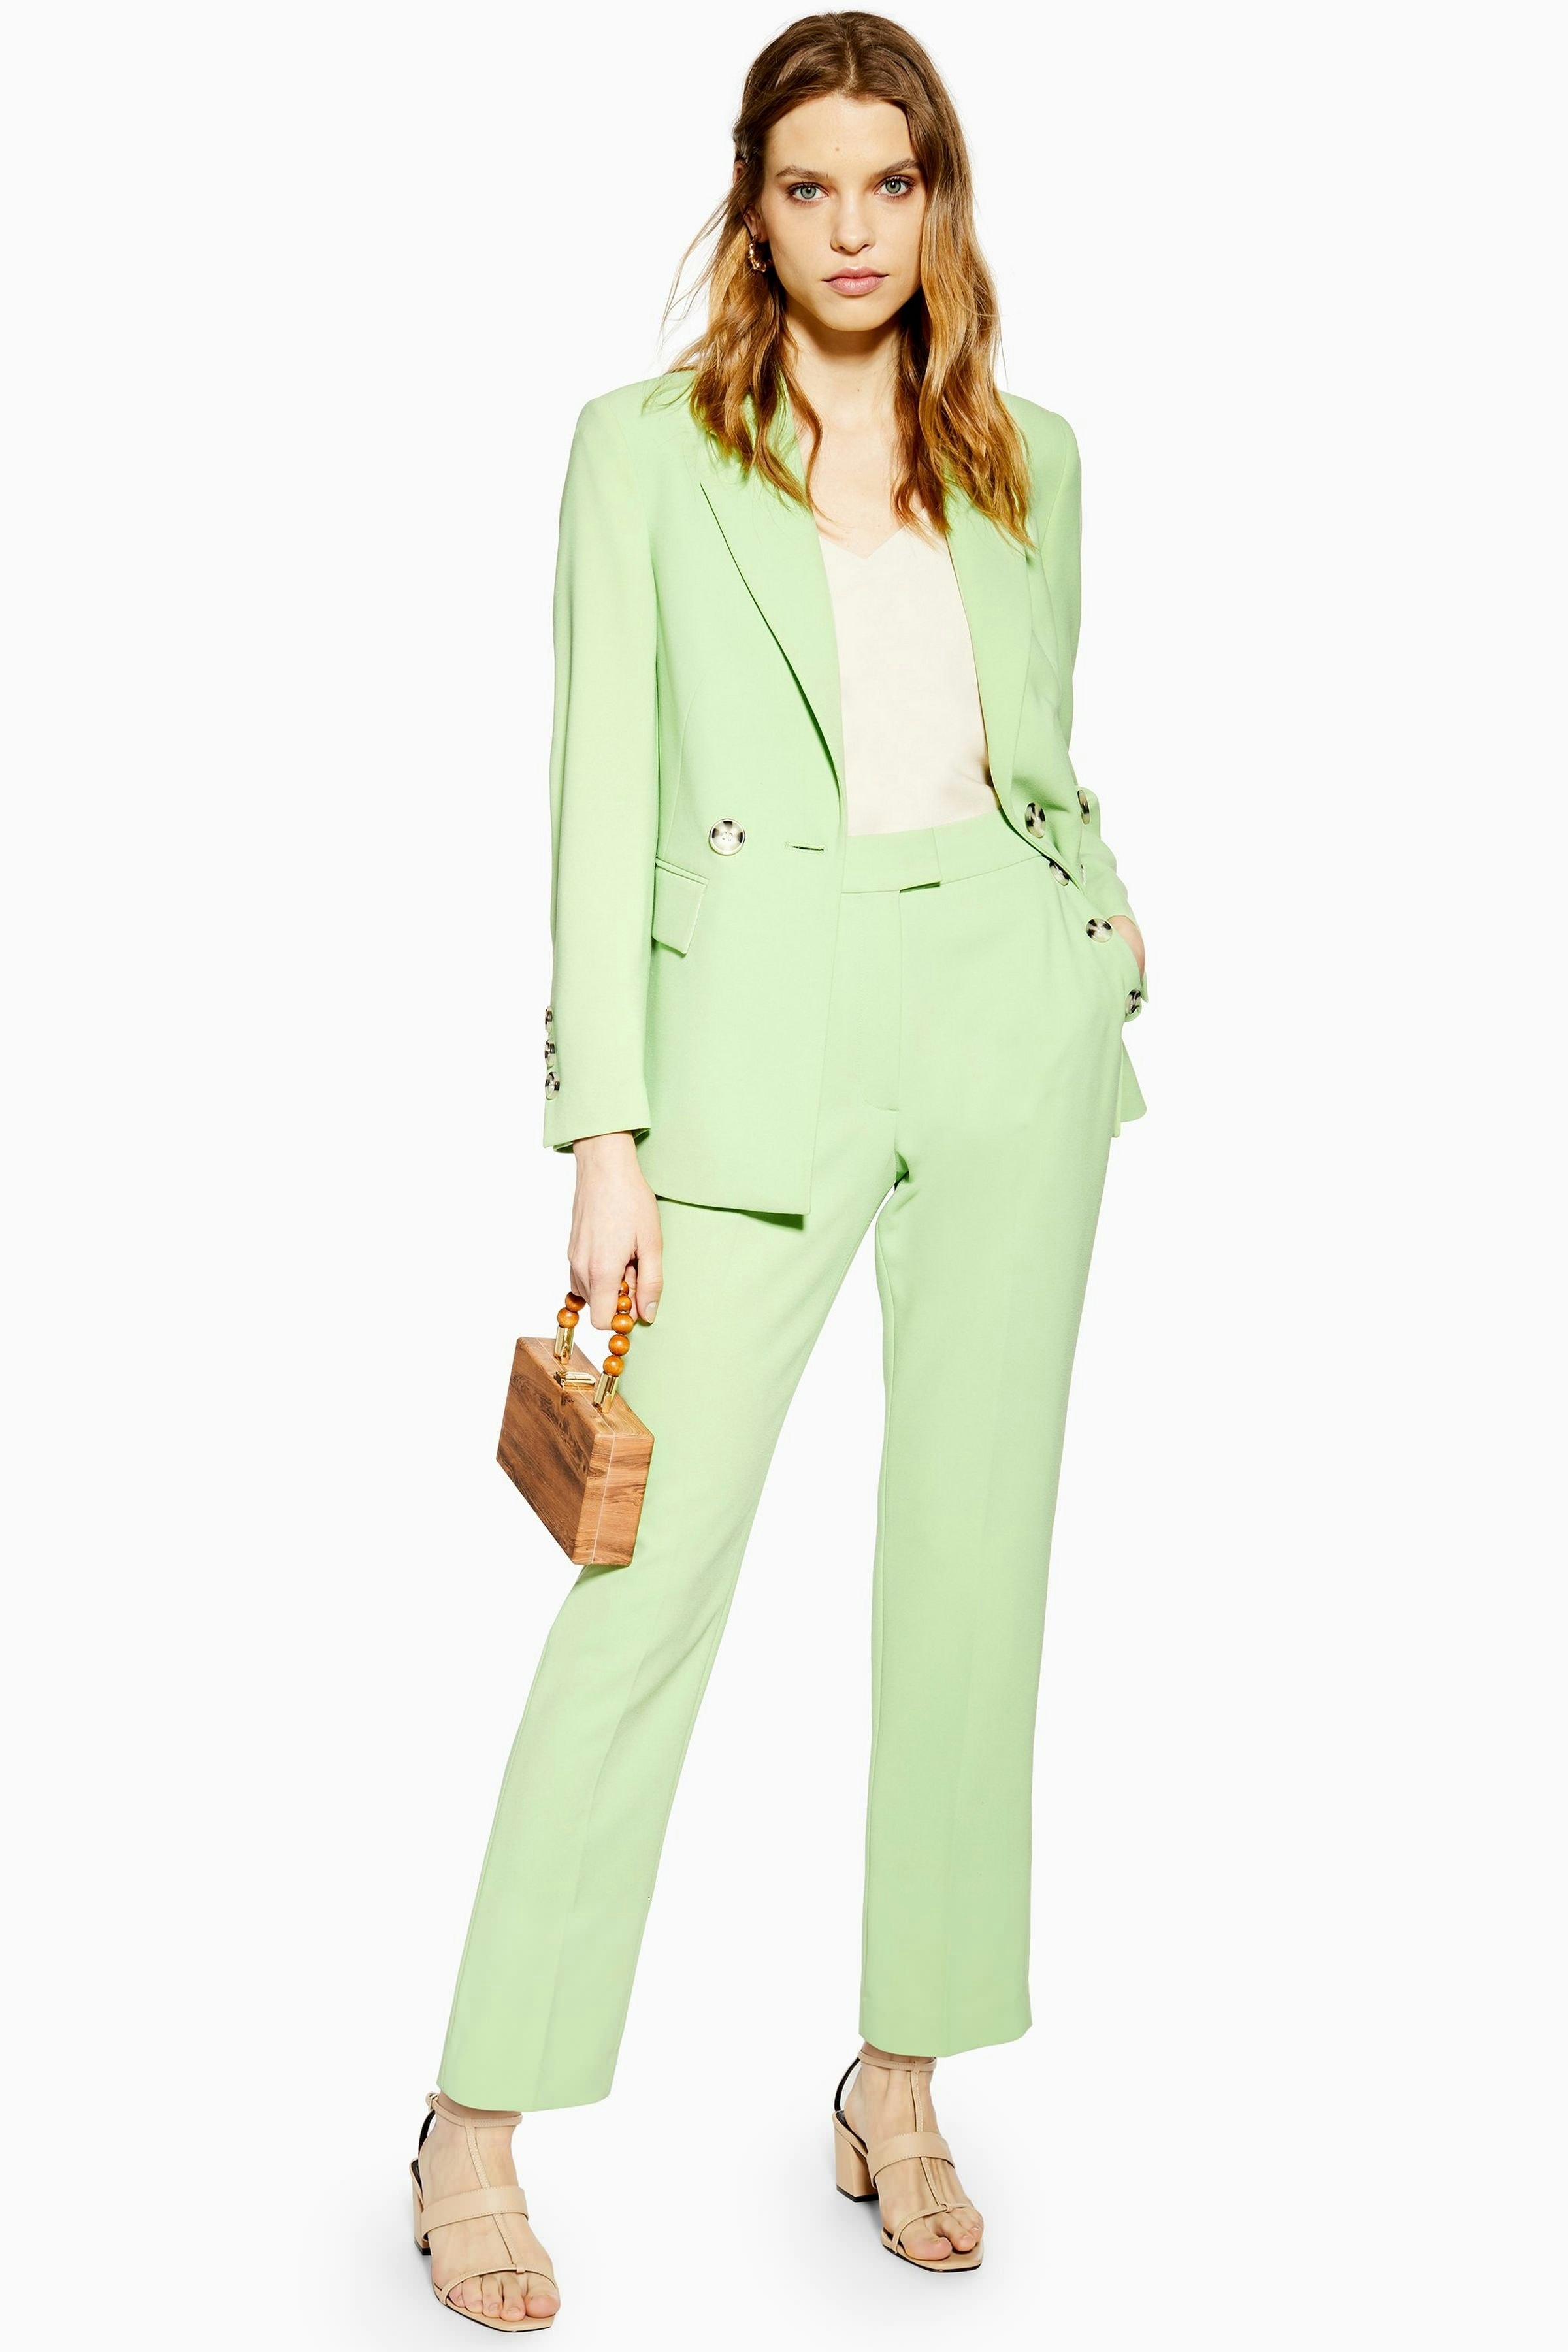 wearing a pantsuit to a wedding